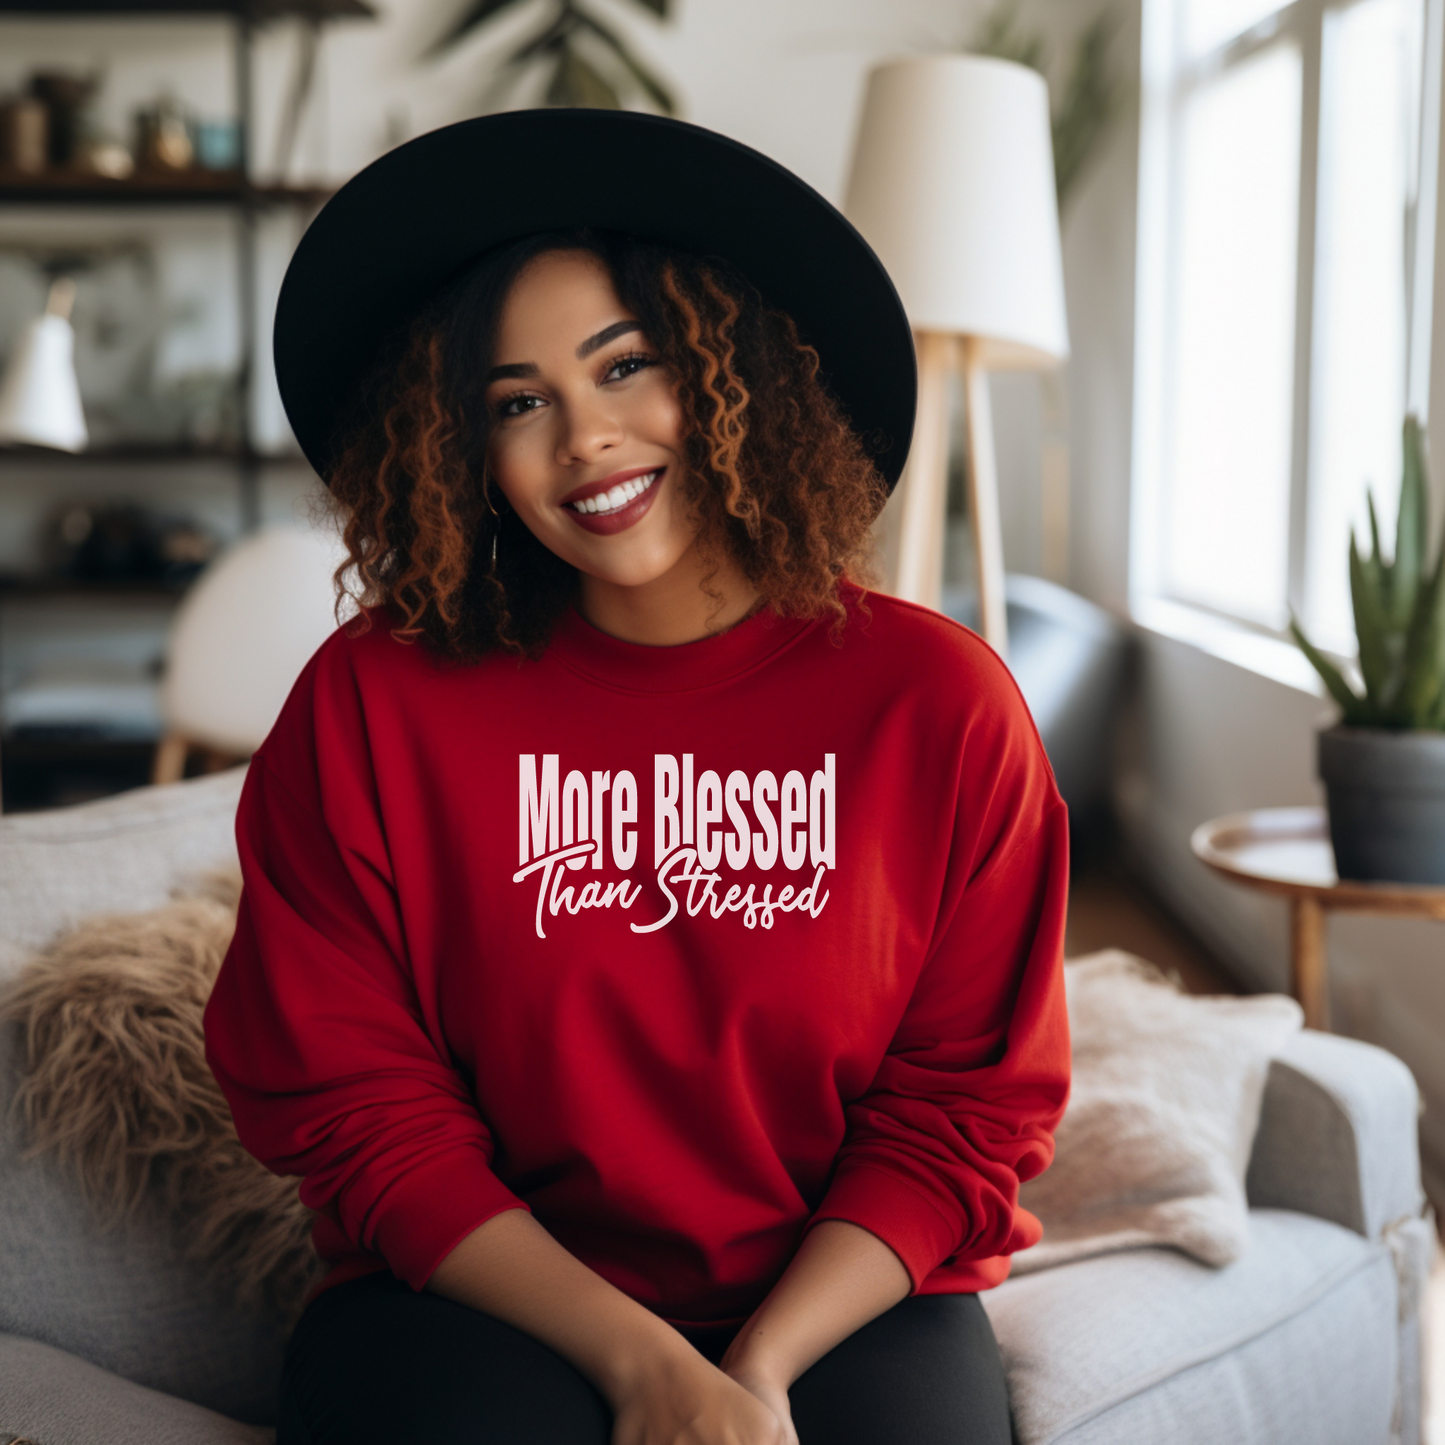 More Blessed than Stressed Sweatshirt